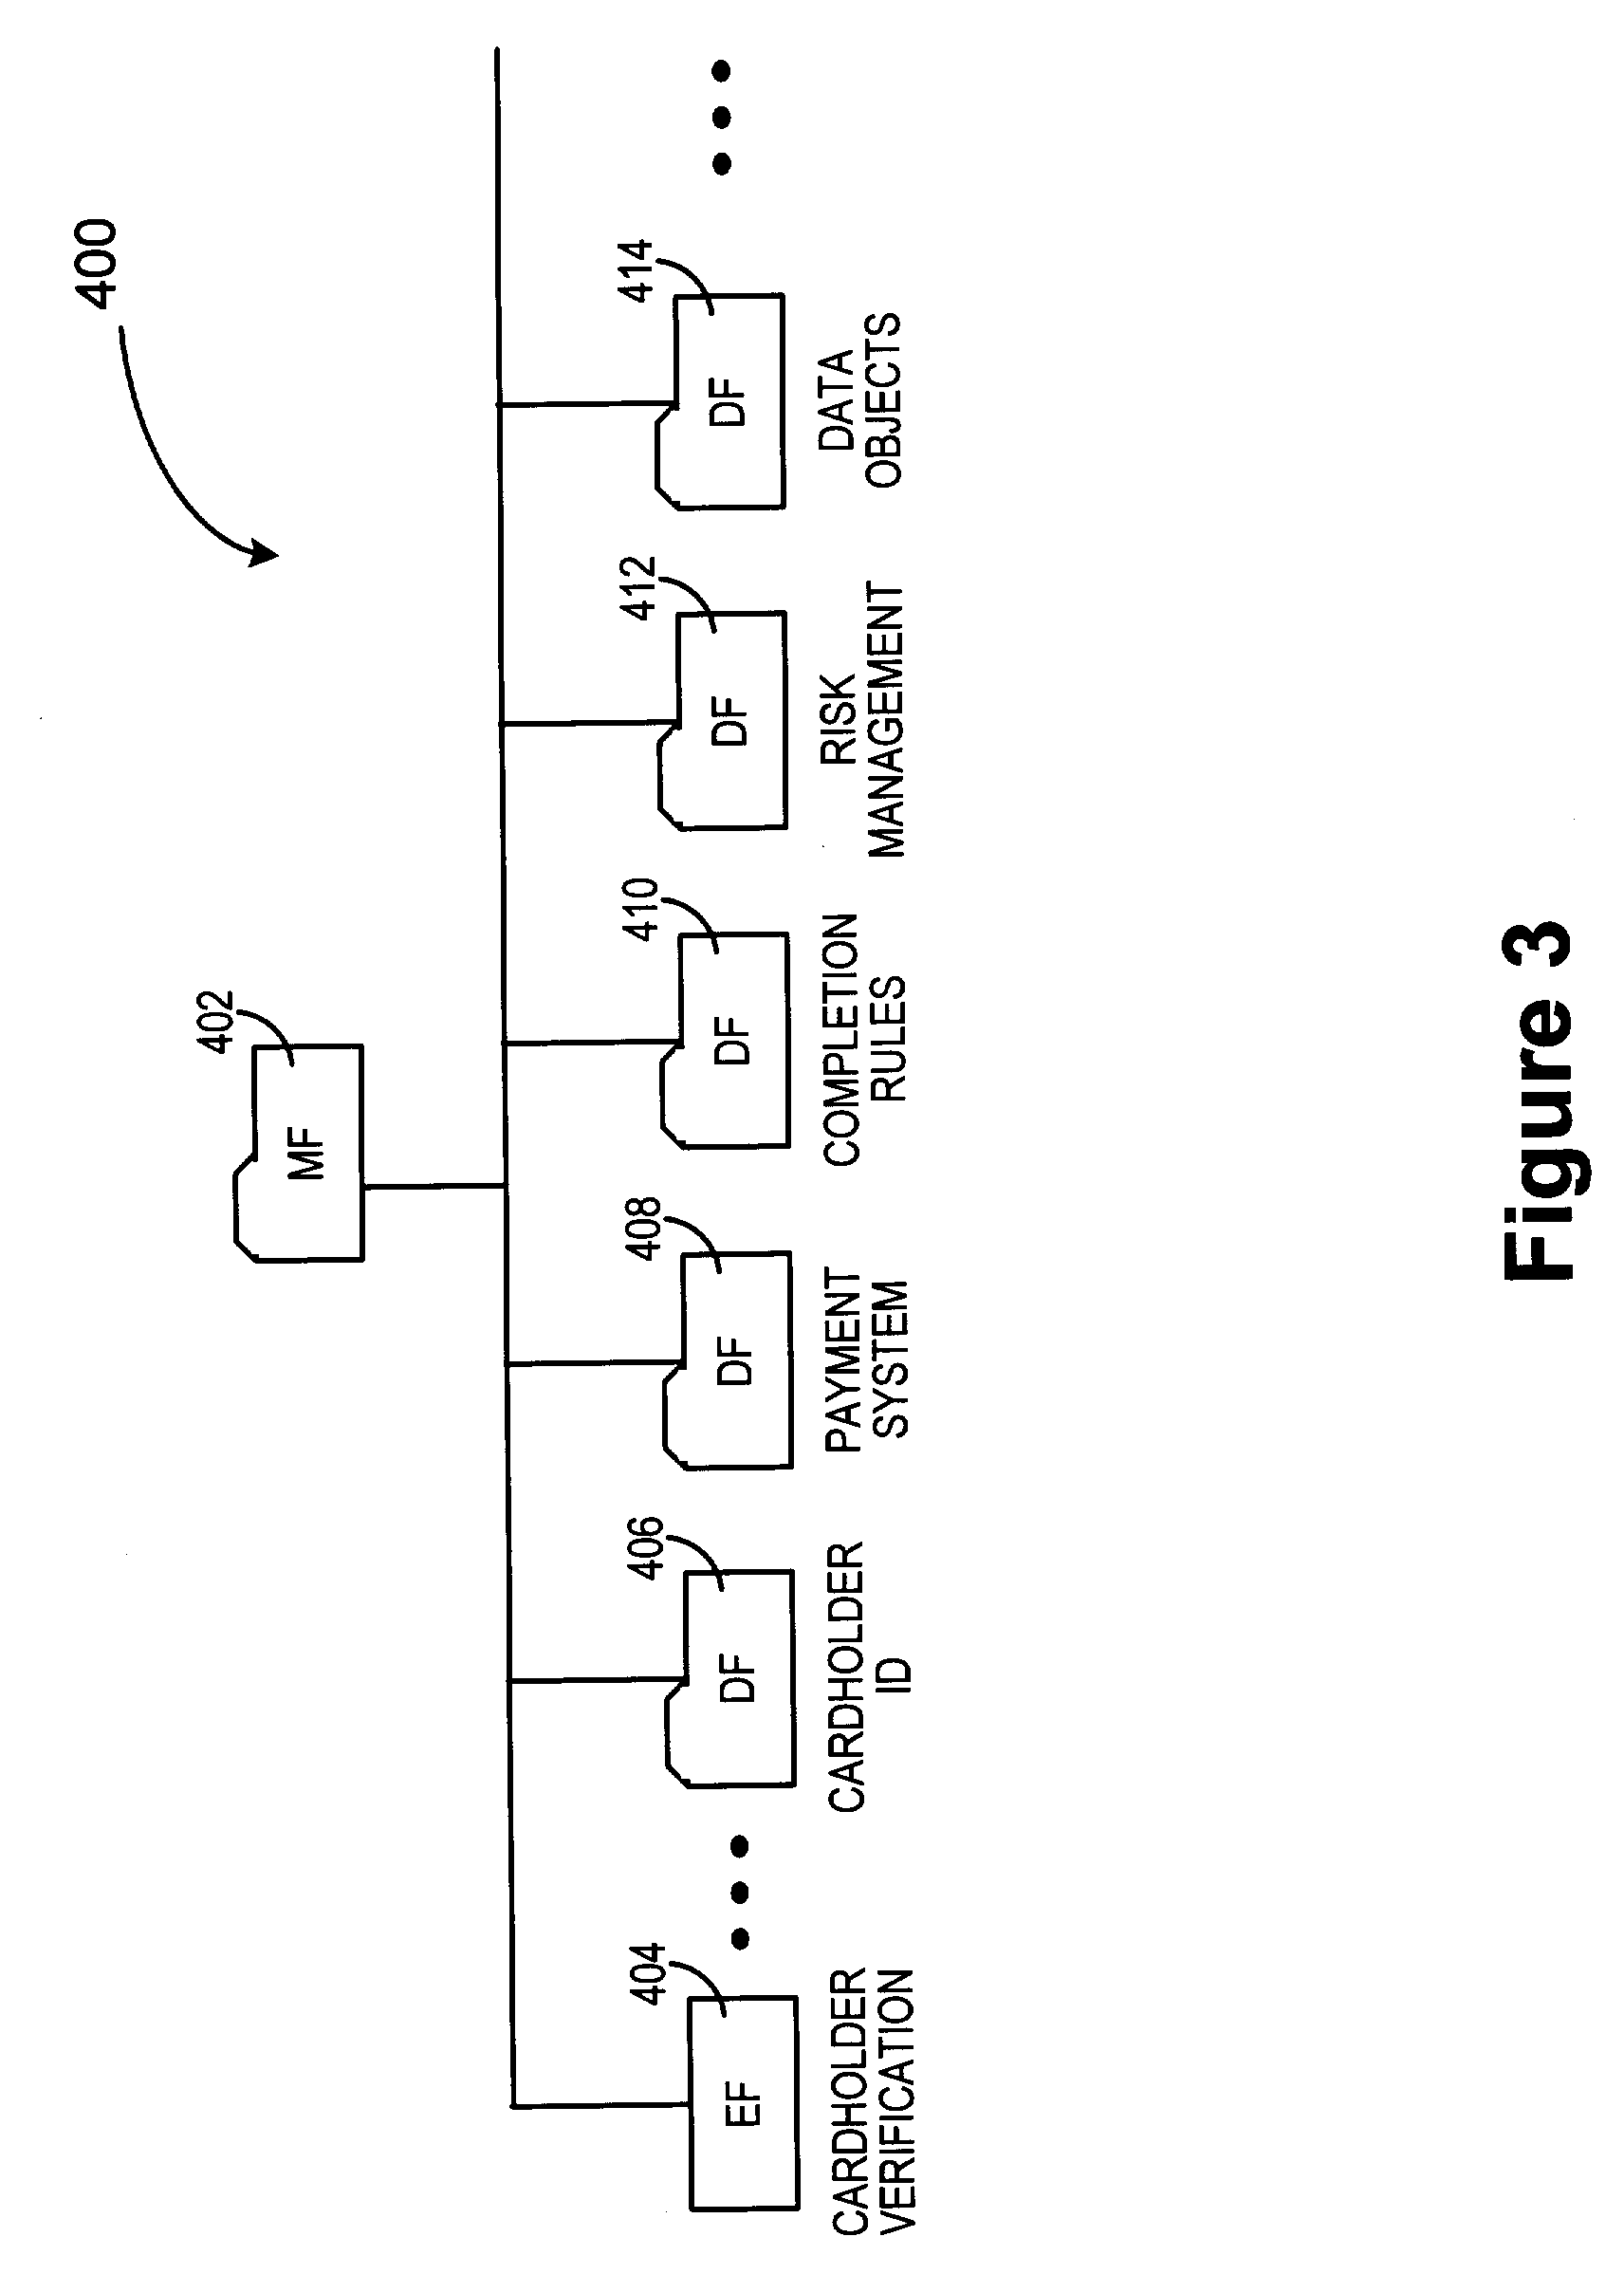 Methods and apparatus for a secure proximity integrated circuit card transactions